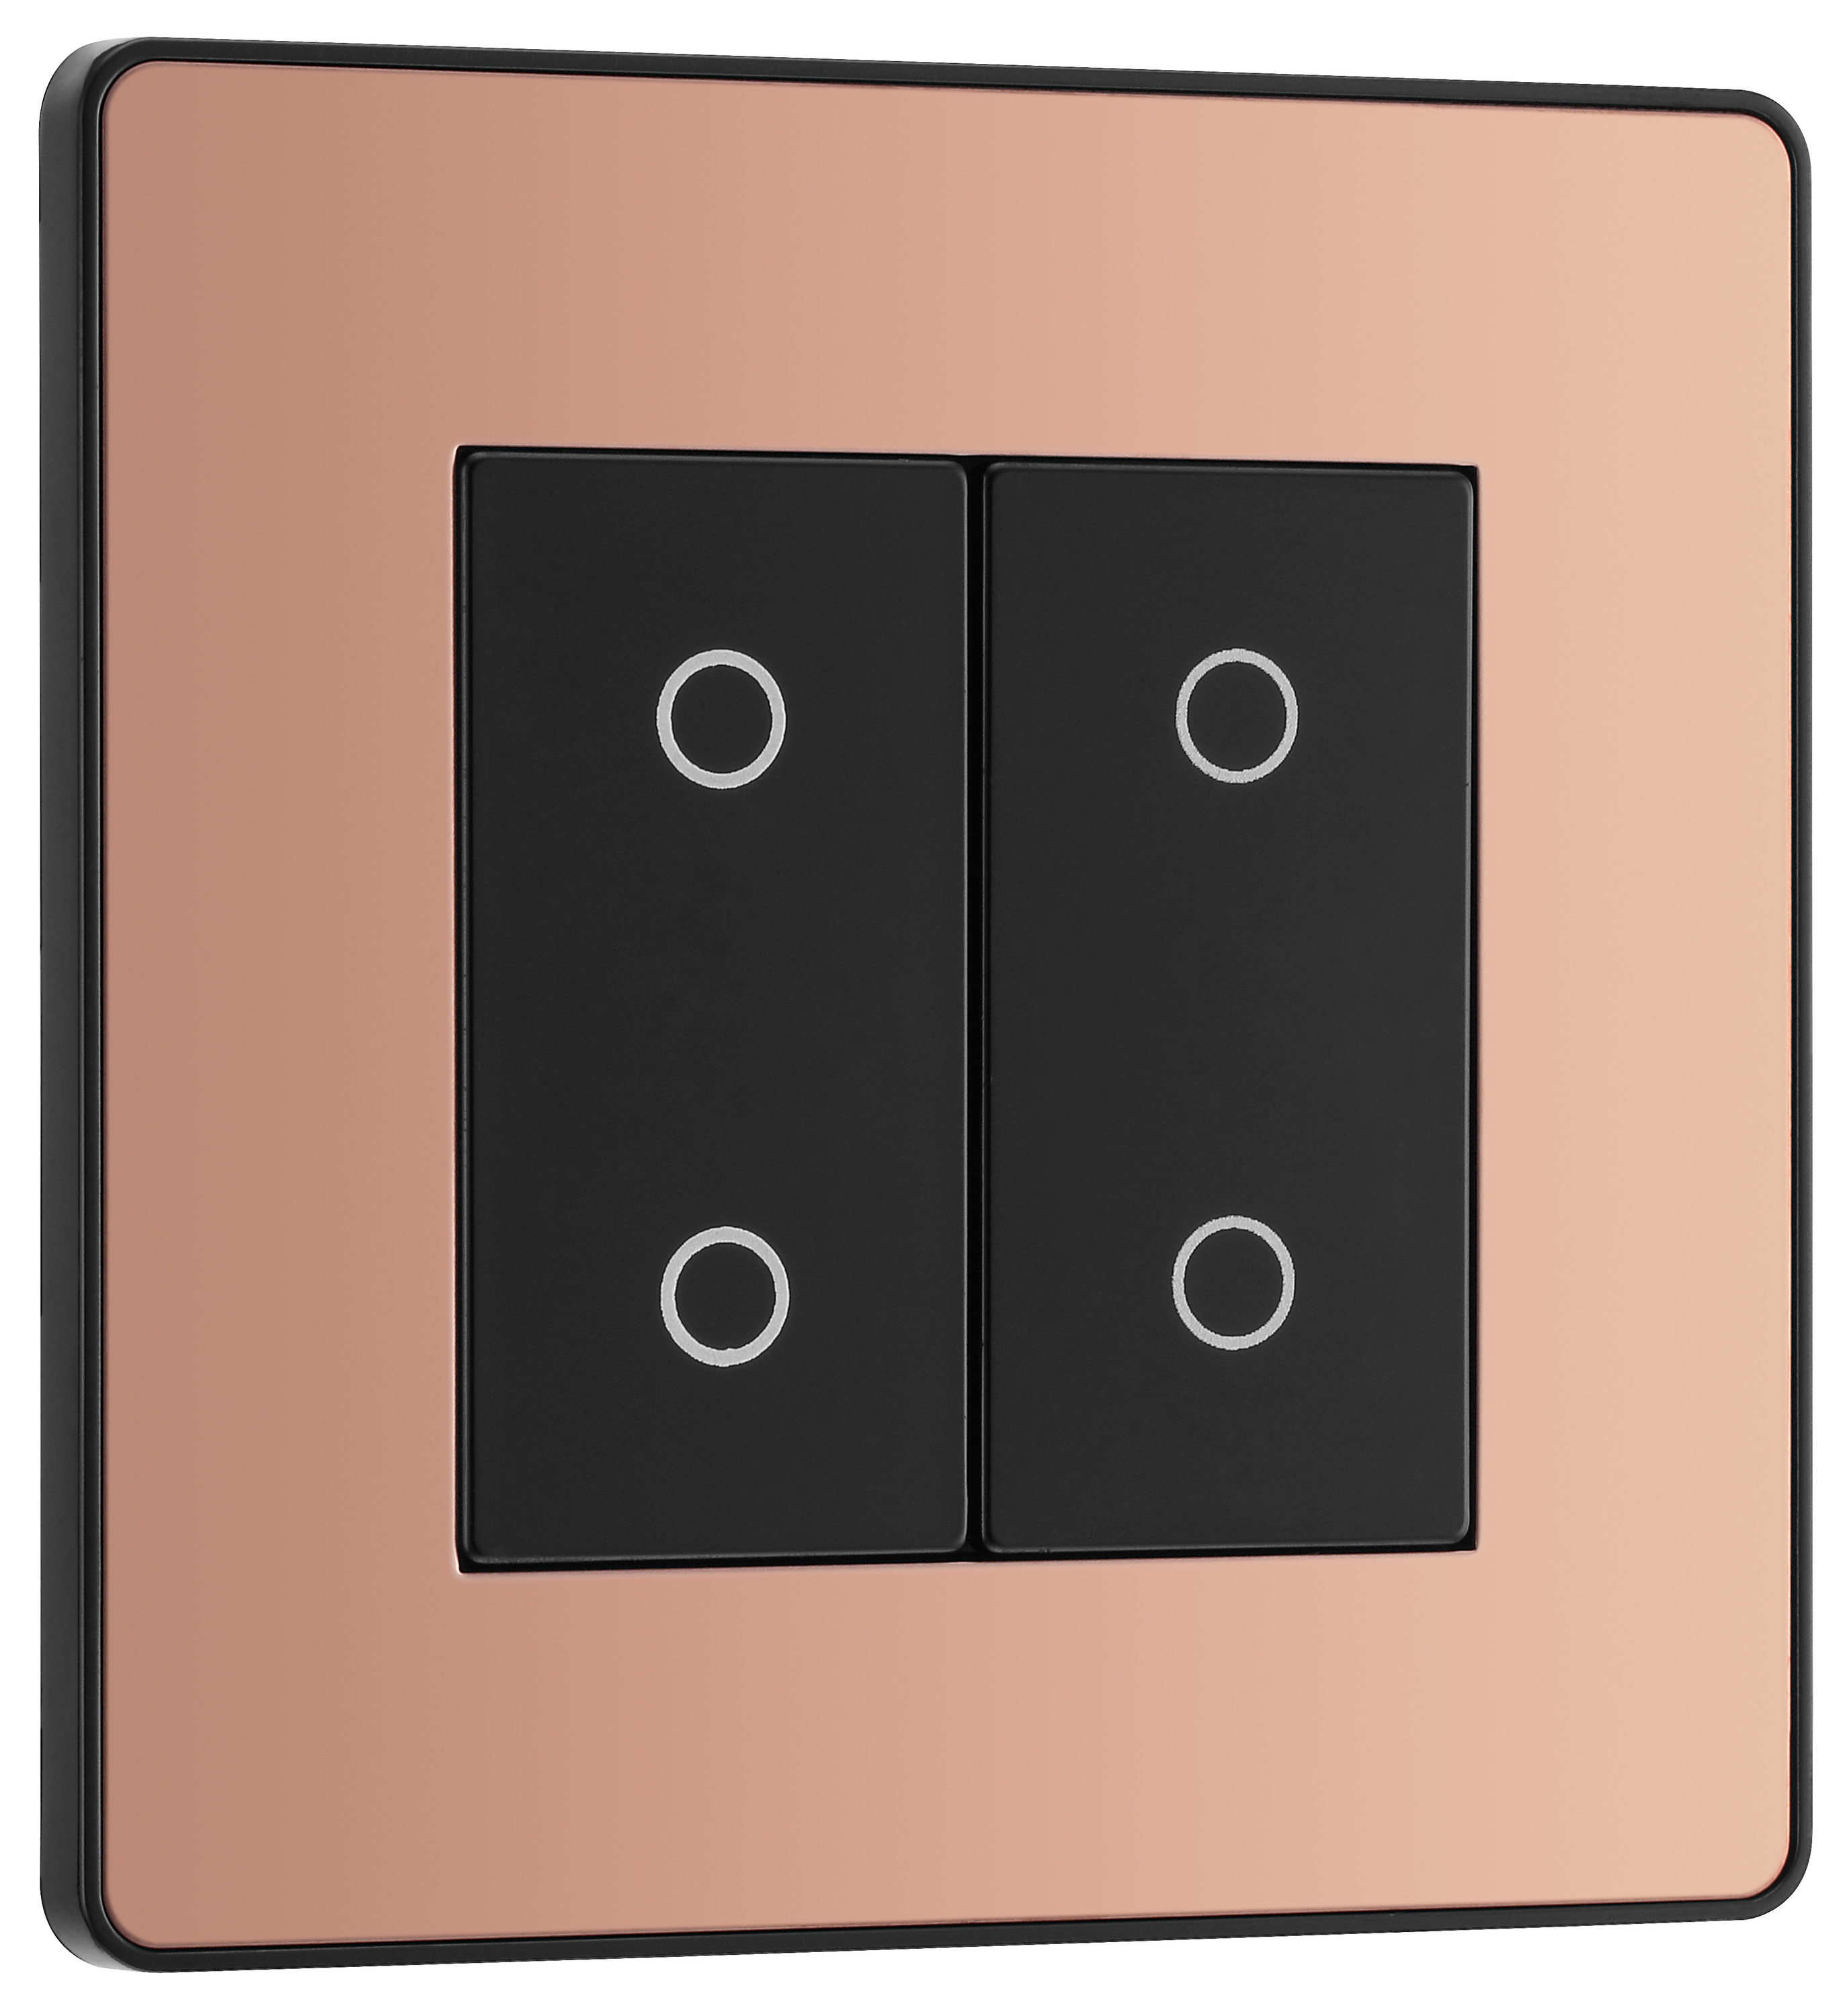 Image of BG Evolve Master Polished Copper 2 Way Double Touch Dimmer Switch - 200W